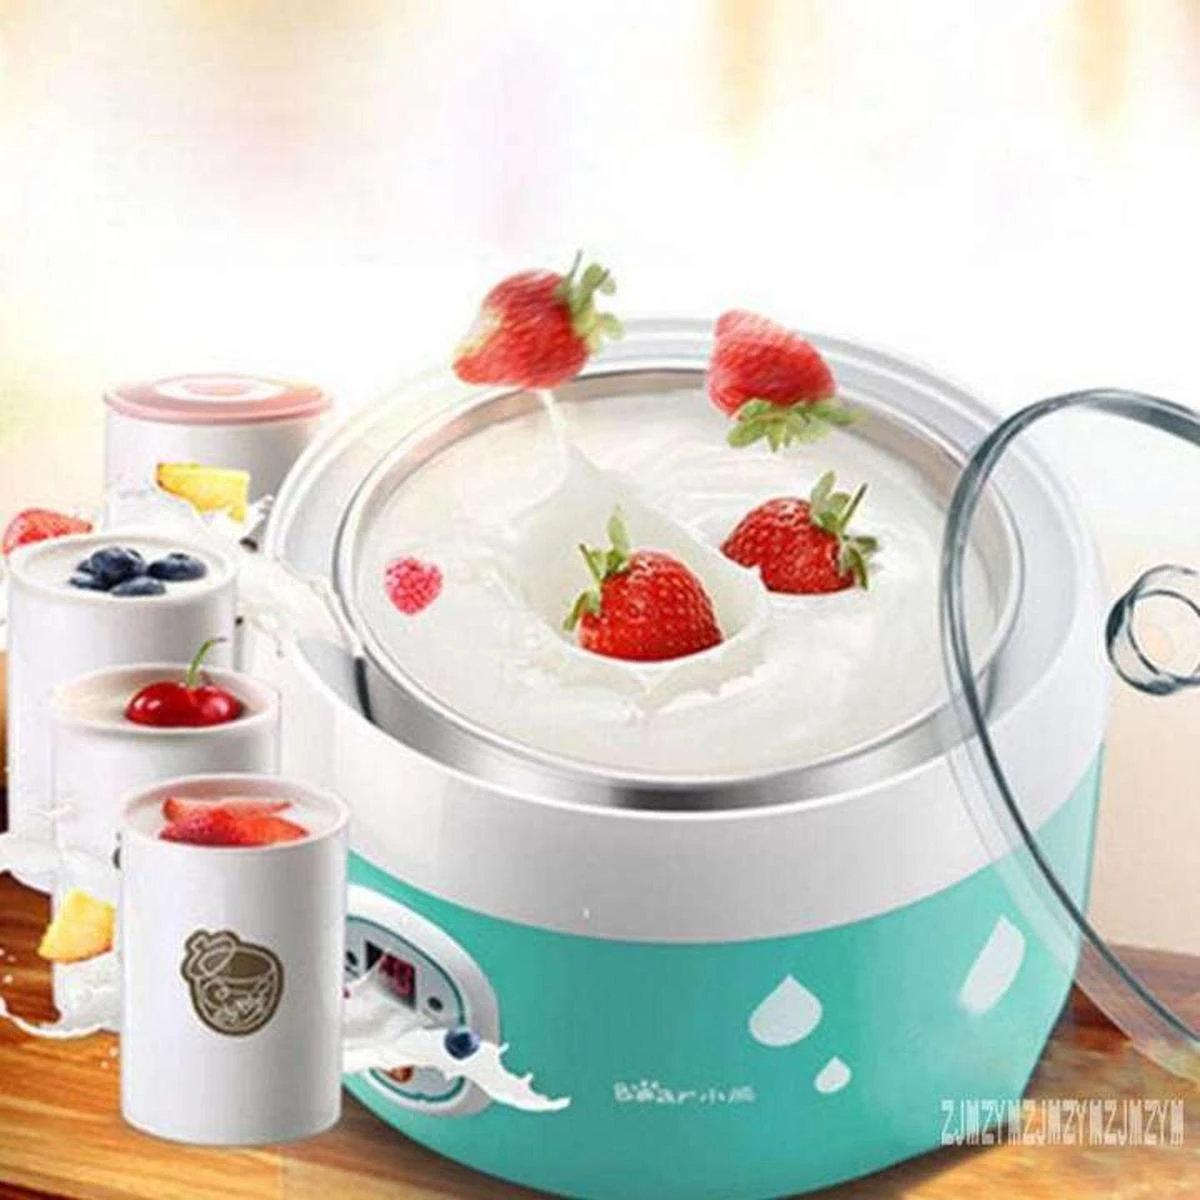 15W (ABS + PP) Material Automatic Electric Yogurt (Doi) Maker with 8-15 Hours Preparation Time - 2 Litter